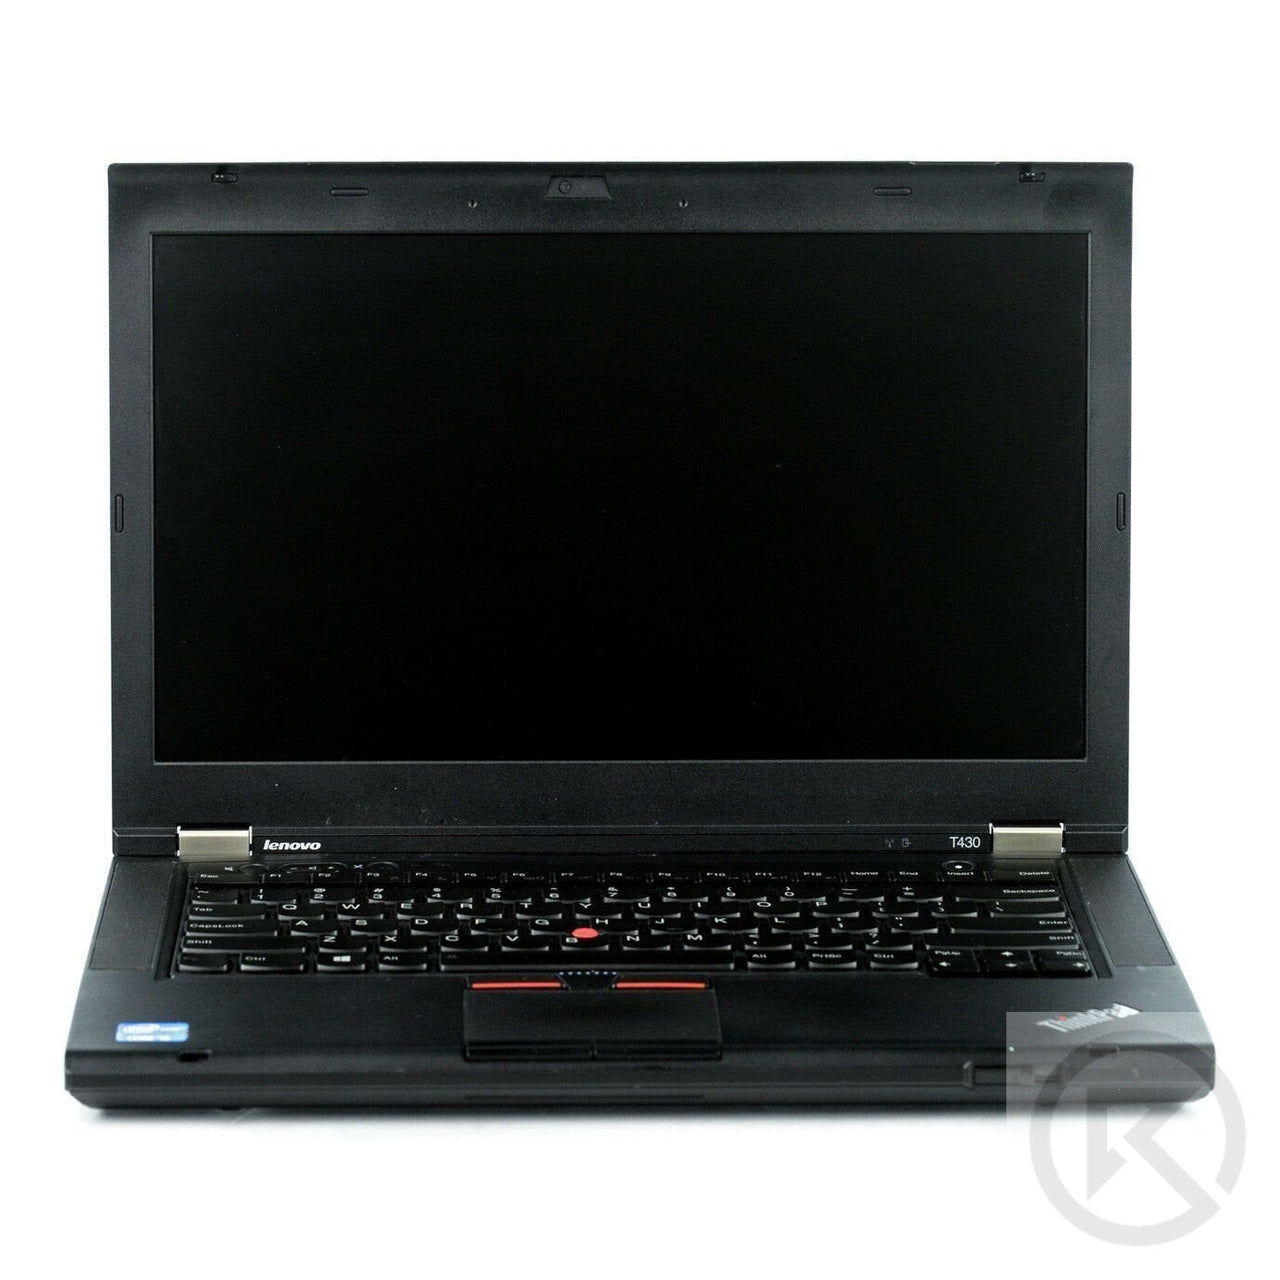 Lenovo Thinkpad T430 14" Intel Core I5 3rd Generation Notebook-Laptop-RefurbConnect-Refurbished-Computers-Laptops-Printers-New York